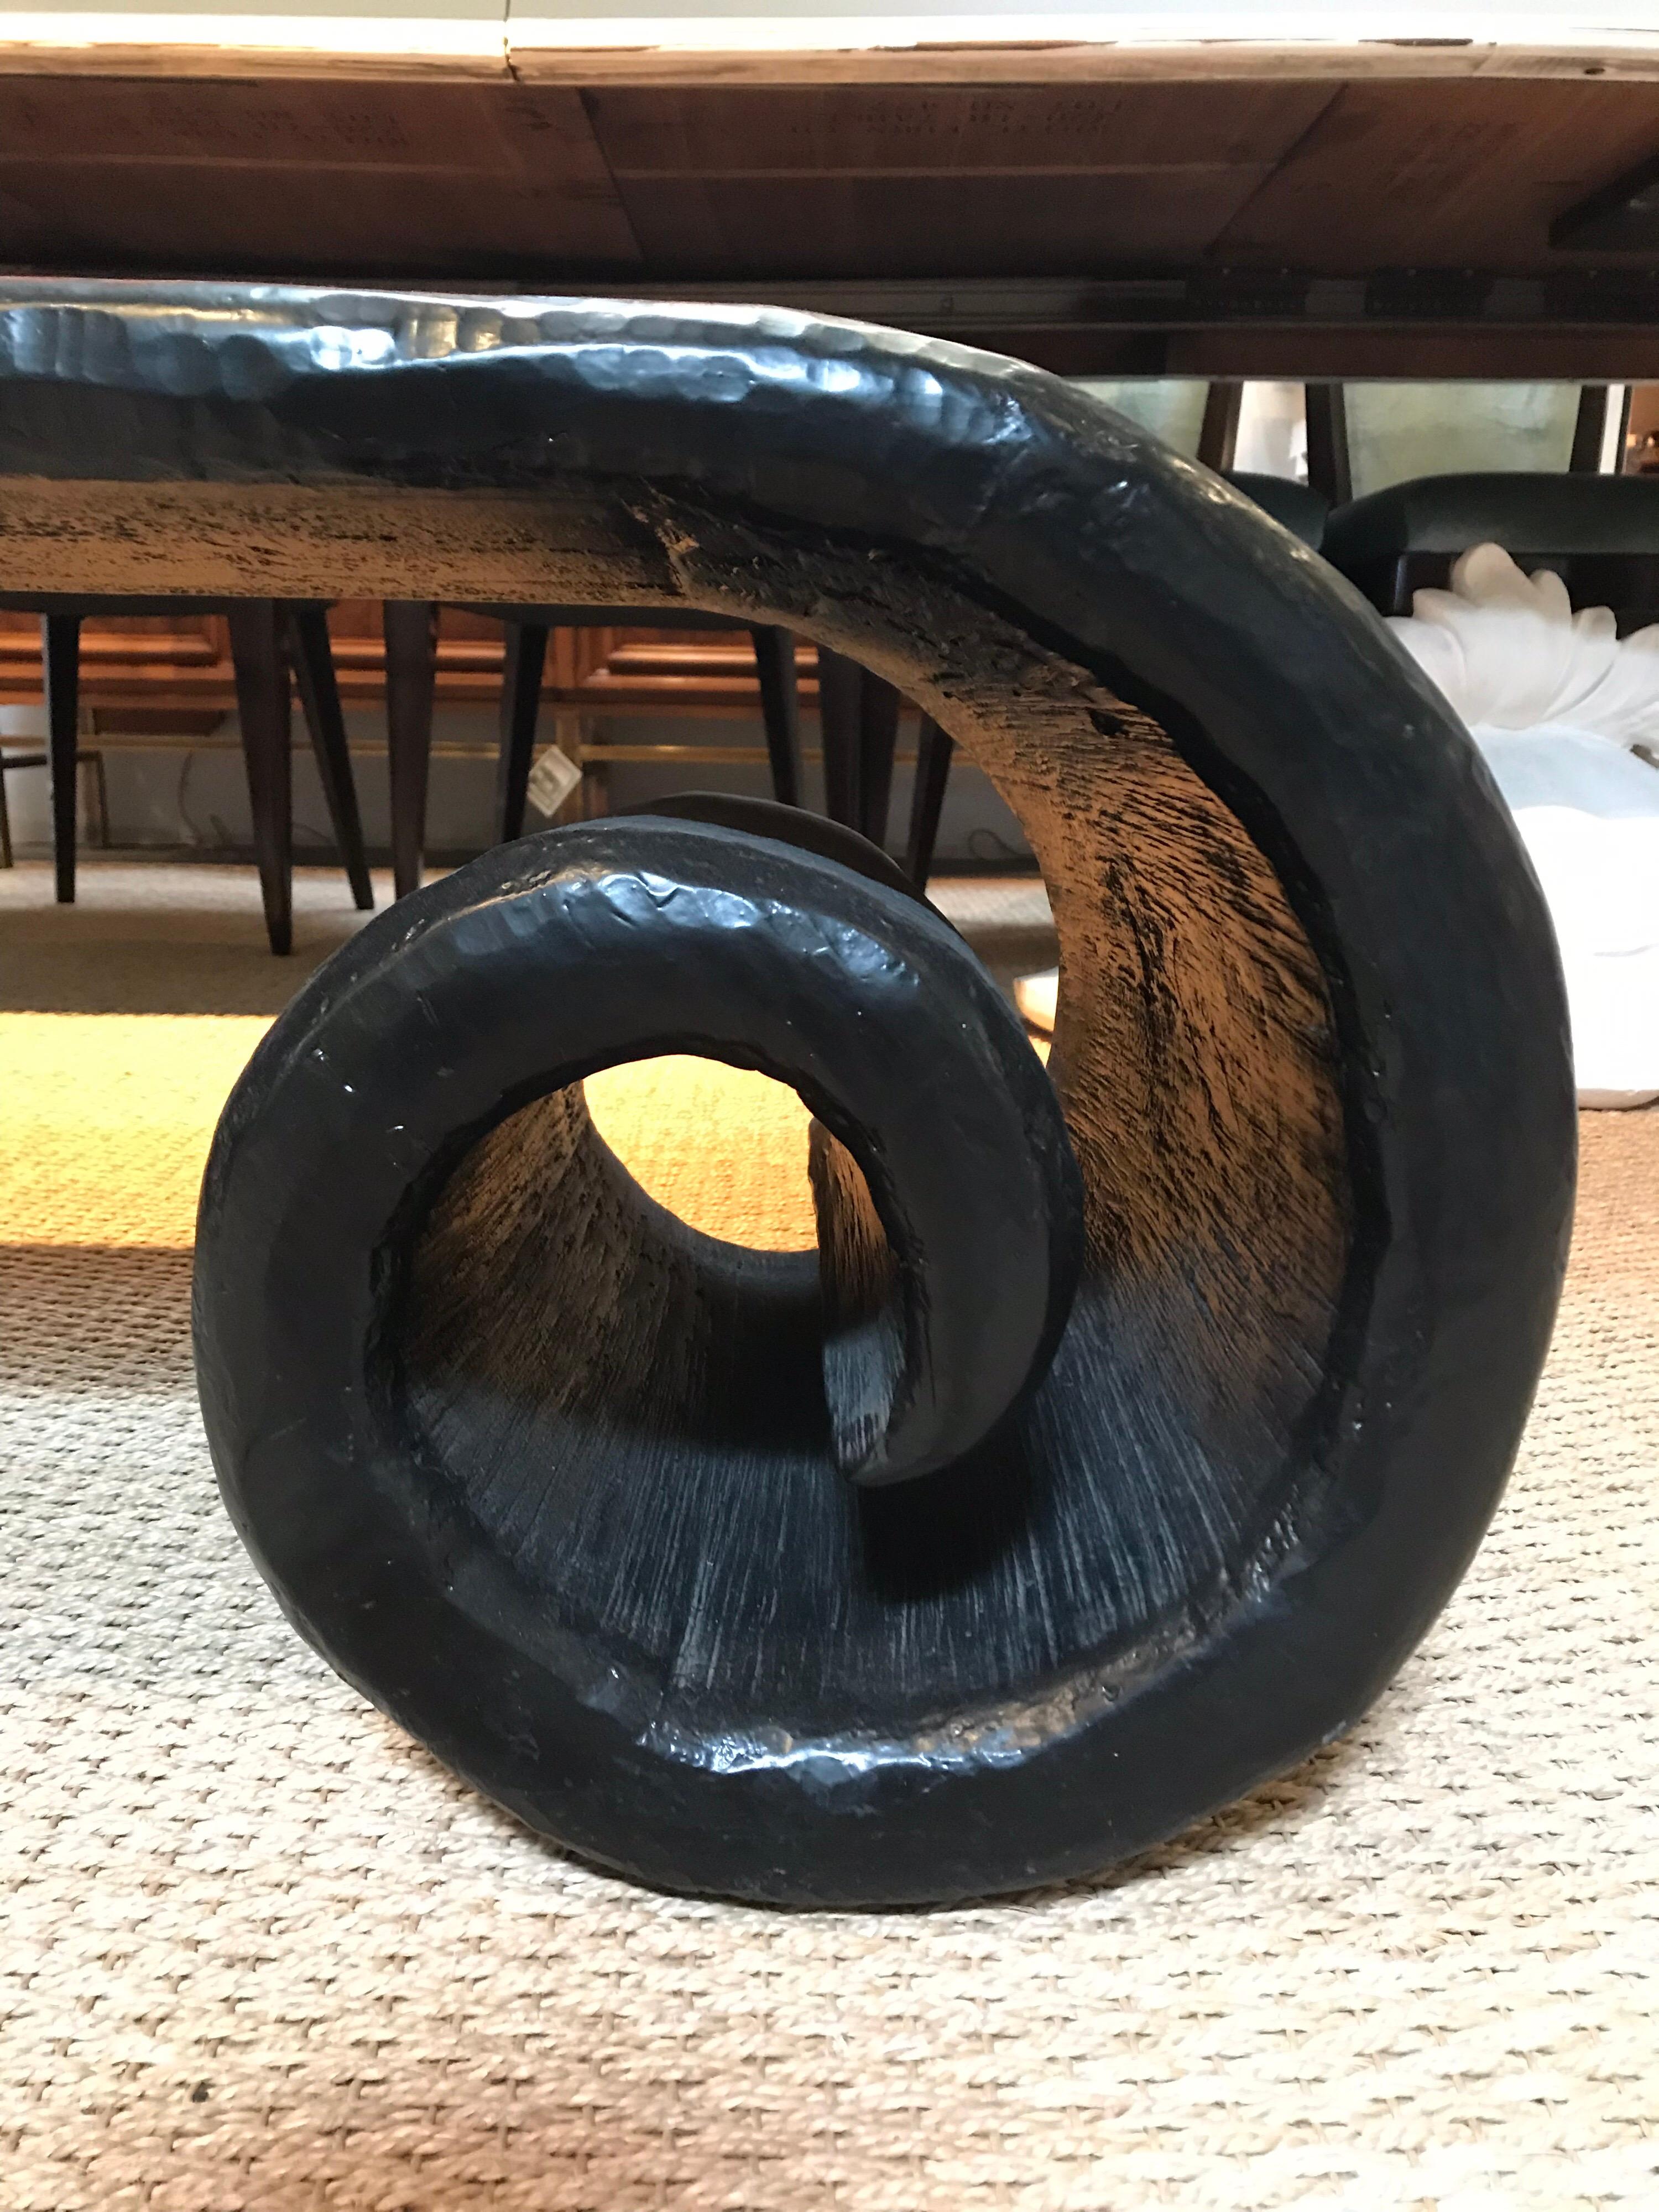 This black, low cocktail table is of Chinese origination and has a handmade element to it. The ends are loosely rolled and curl under the table surface as supports for the 'table-top'.